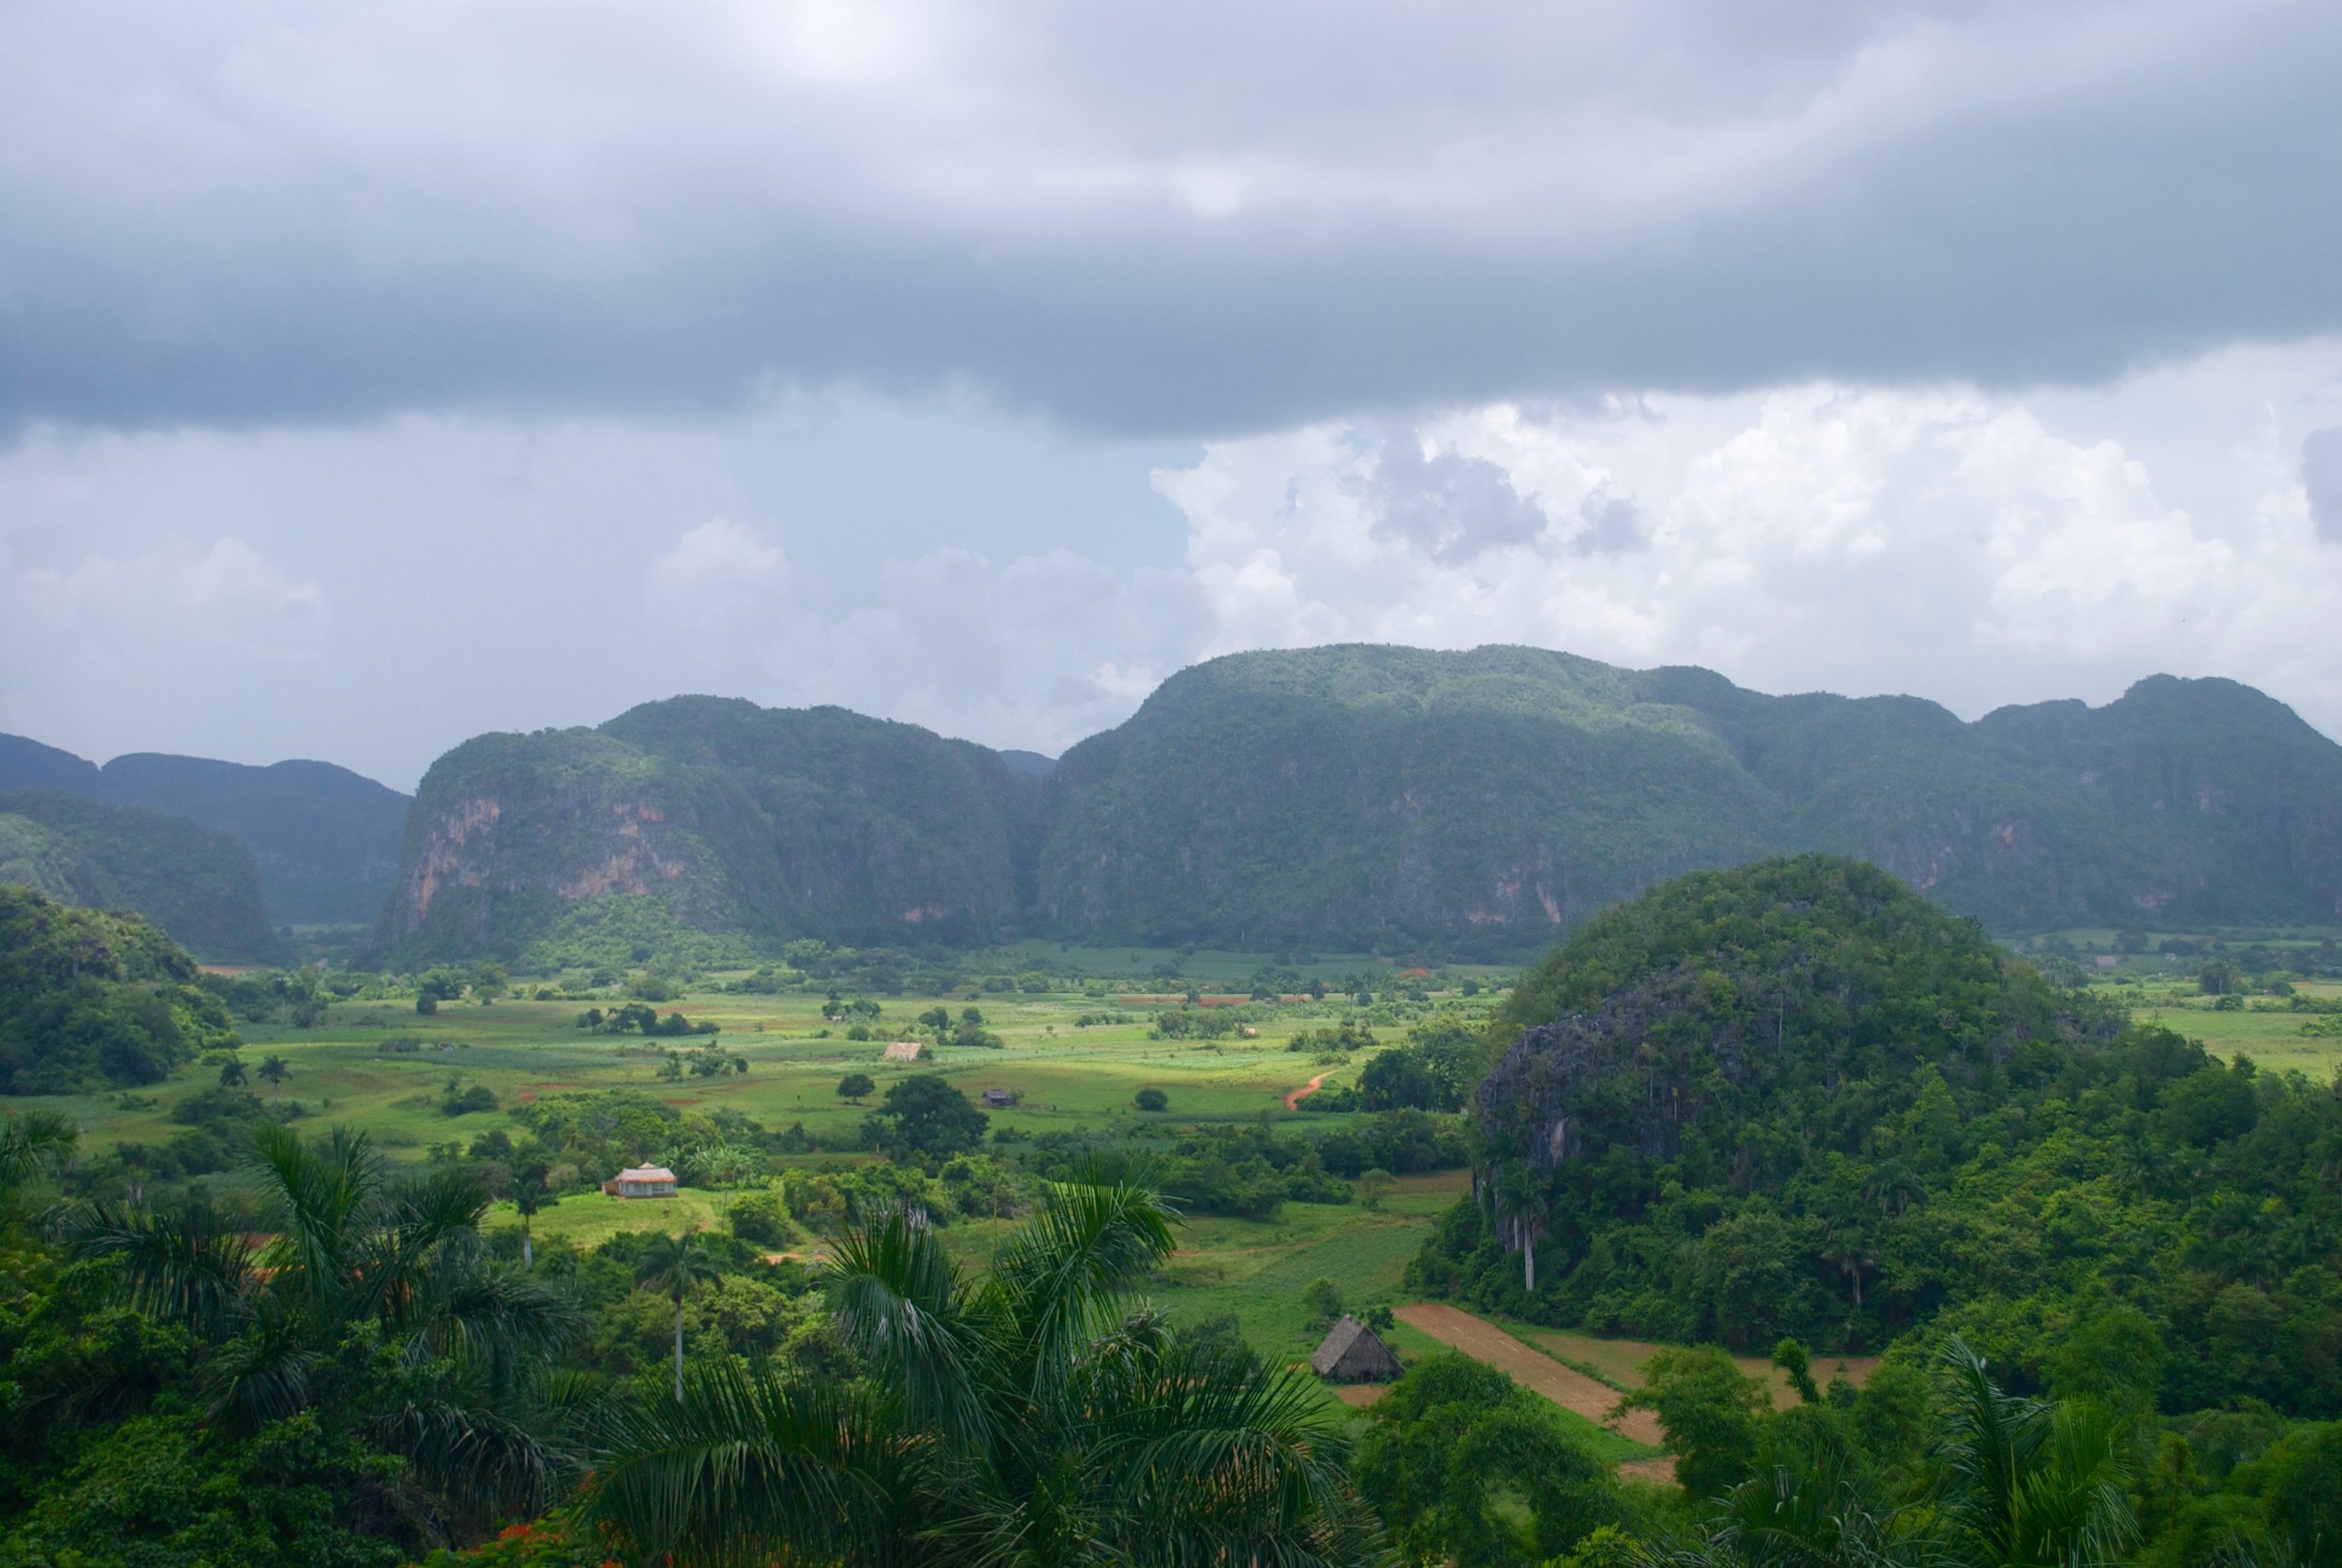 Day 4: Explore the Viñales valley and have lunch at the Mural of Prehistory before boarding the bus to Guanahacabibes National Park.